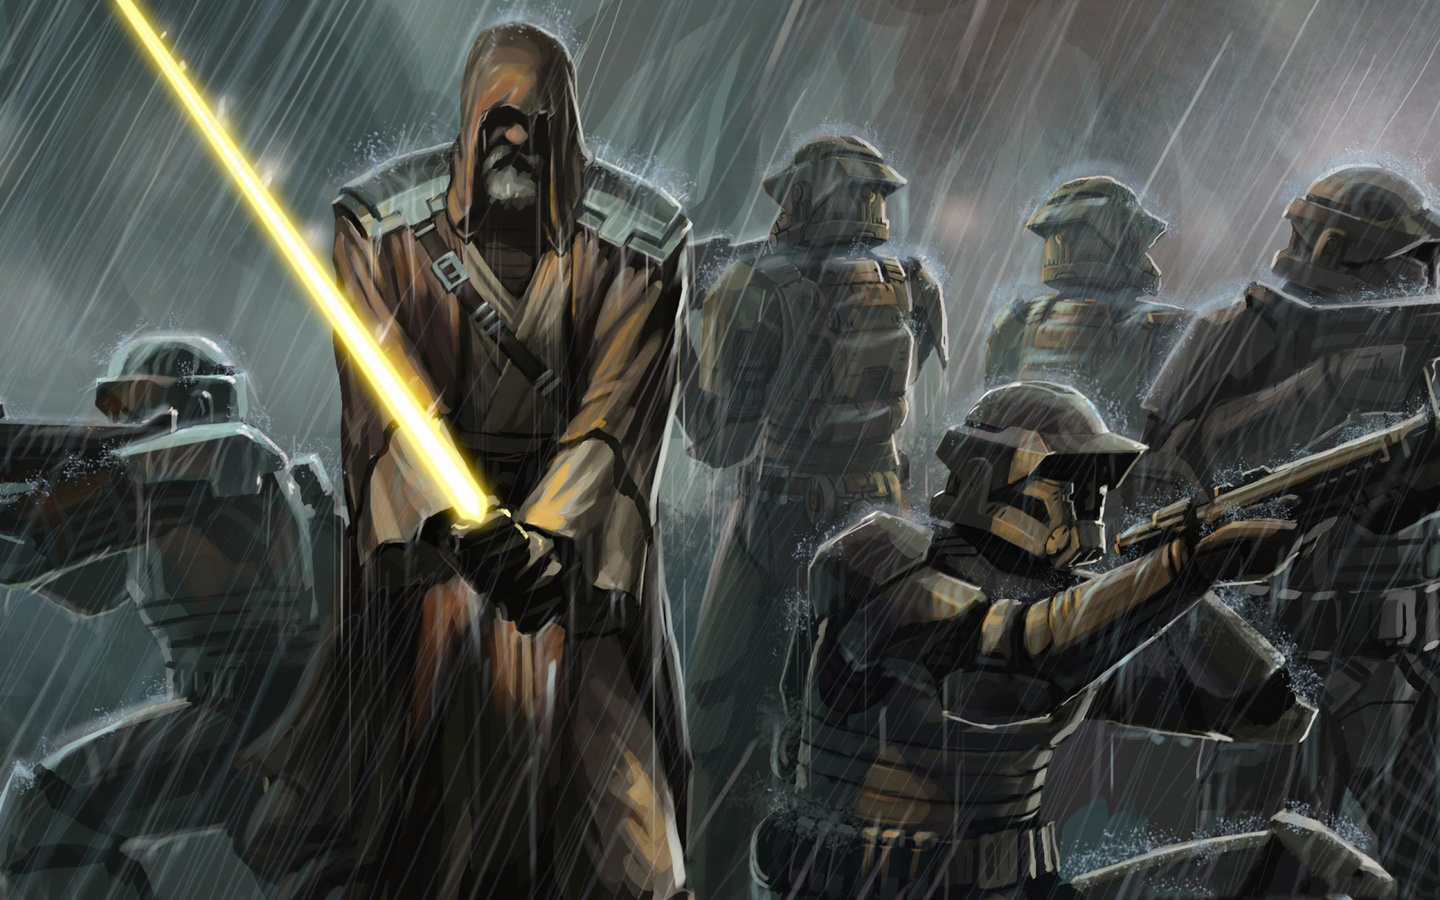 1440x900 star wars, clones, the rain, jedi, sword Wallpapers and other